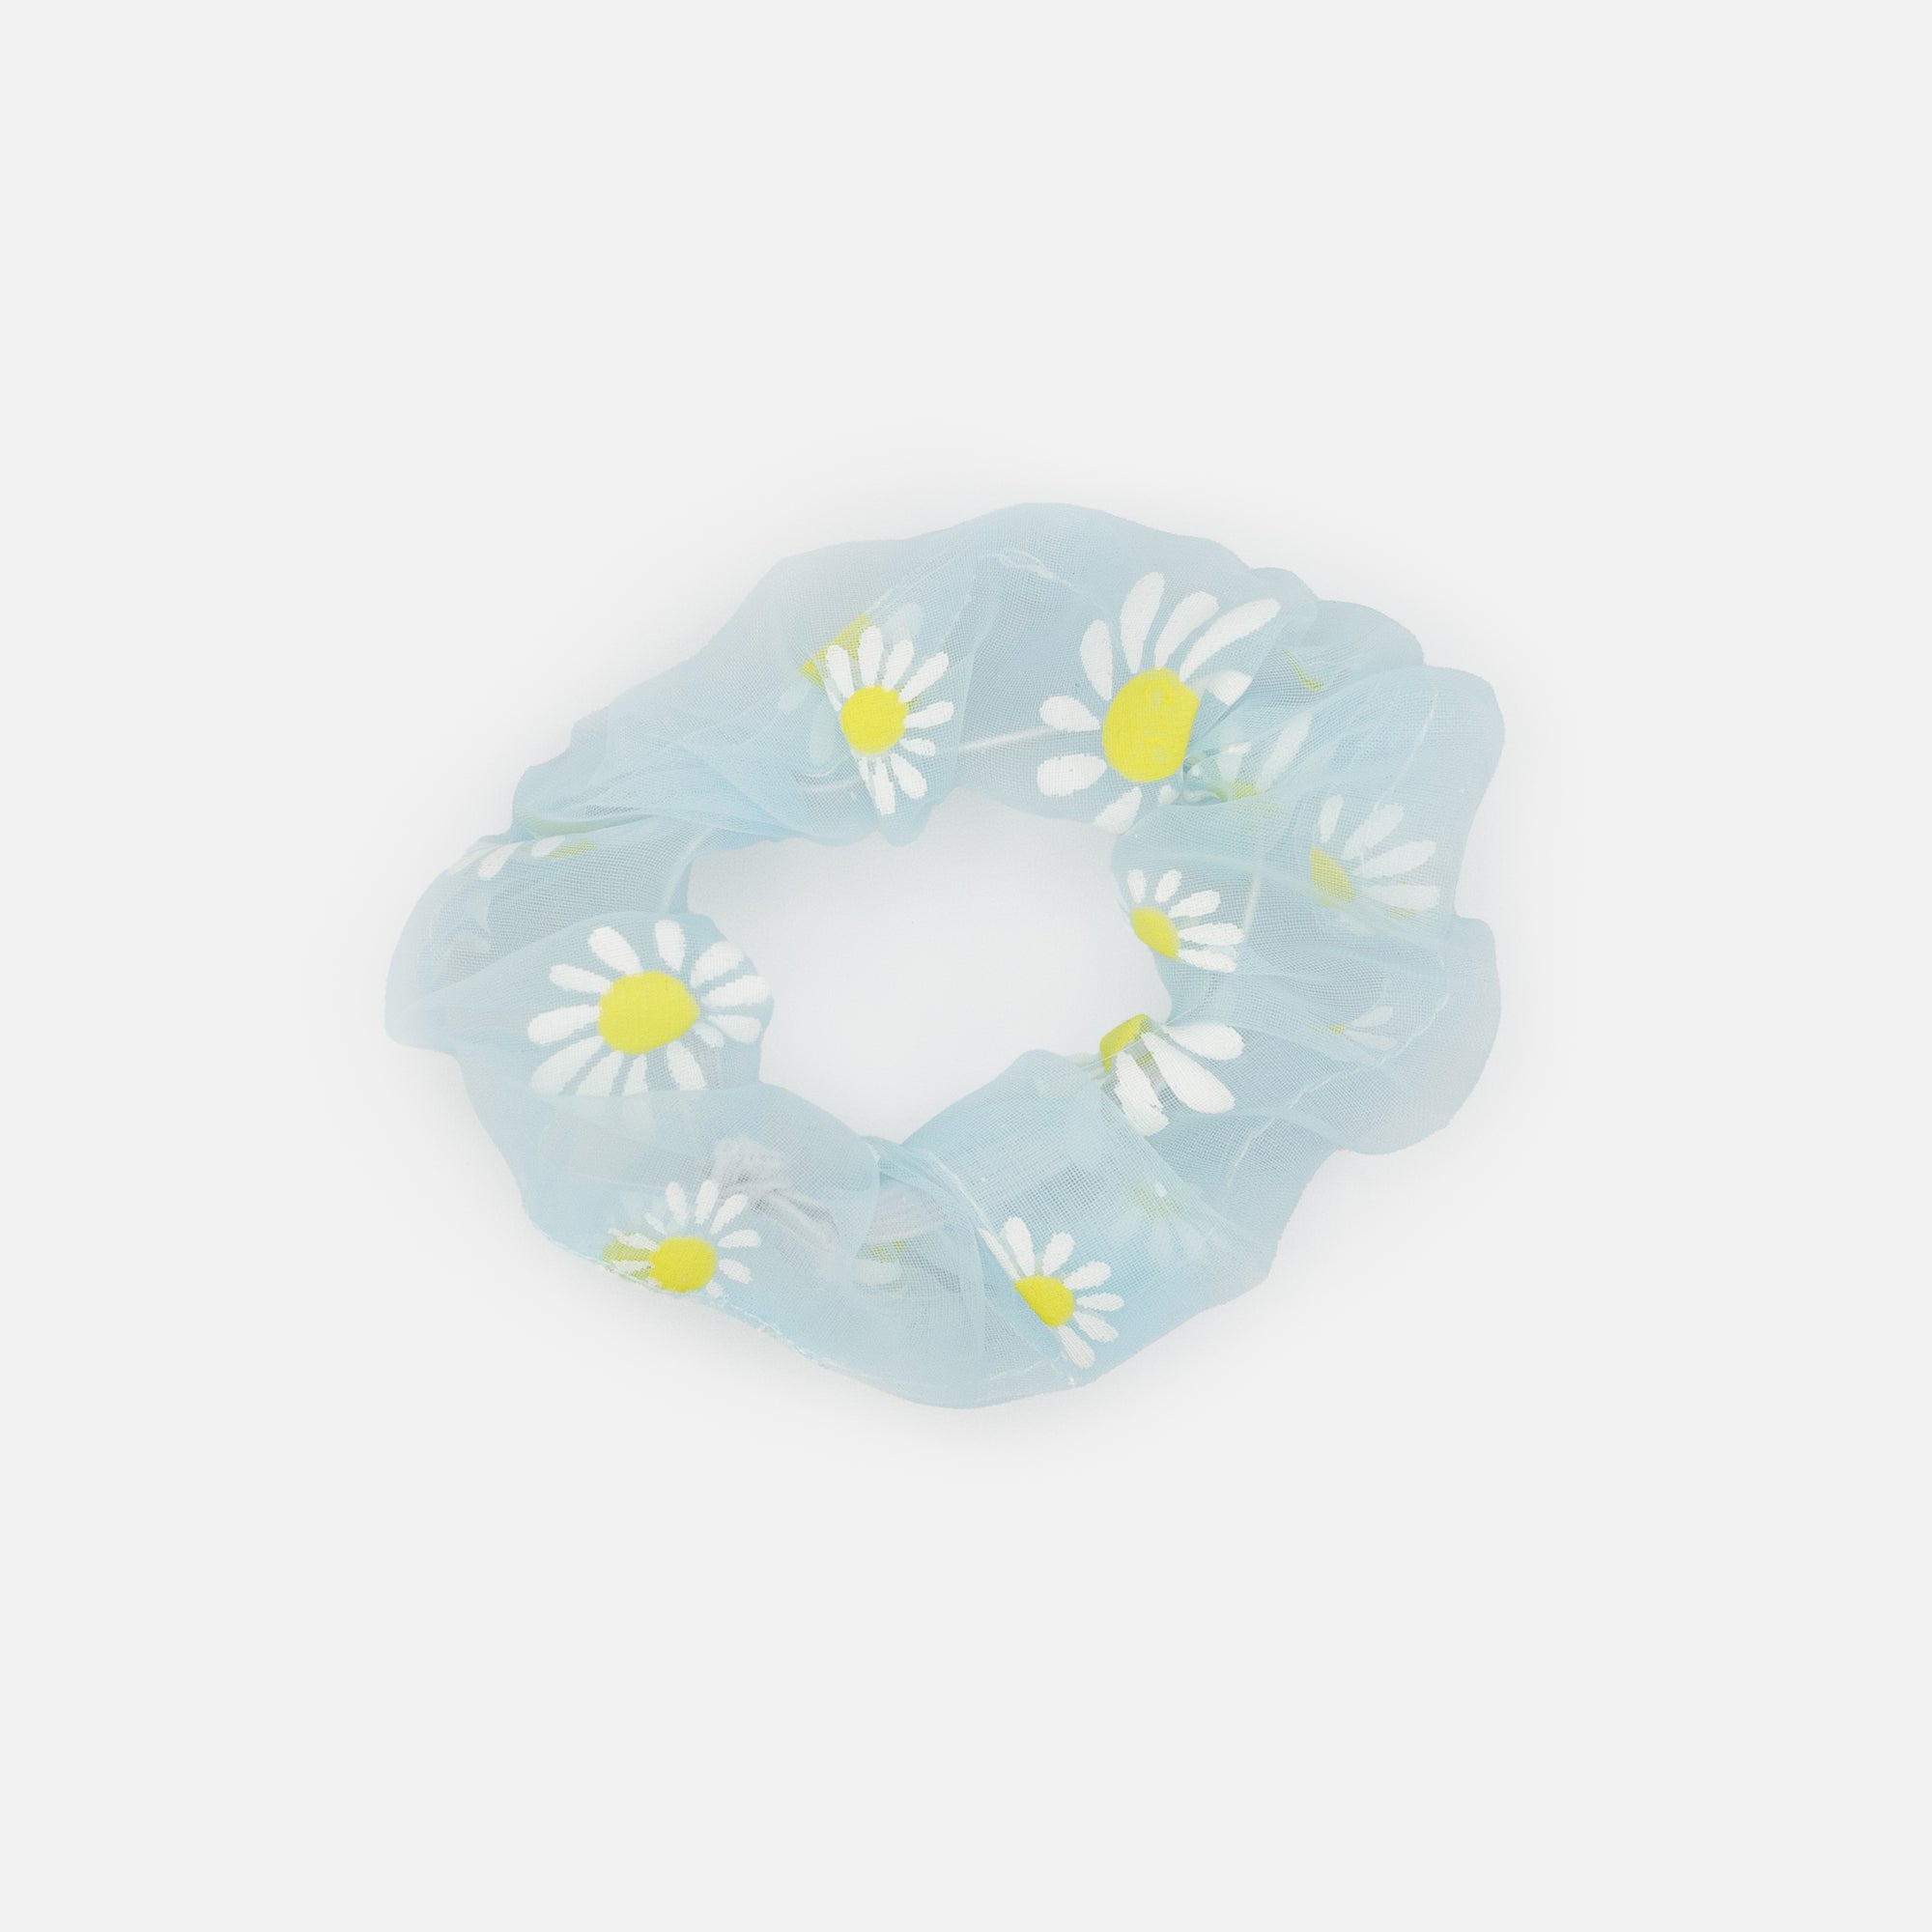 Duo of translucent blue and white scrunchies with daisies